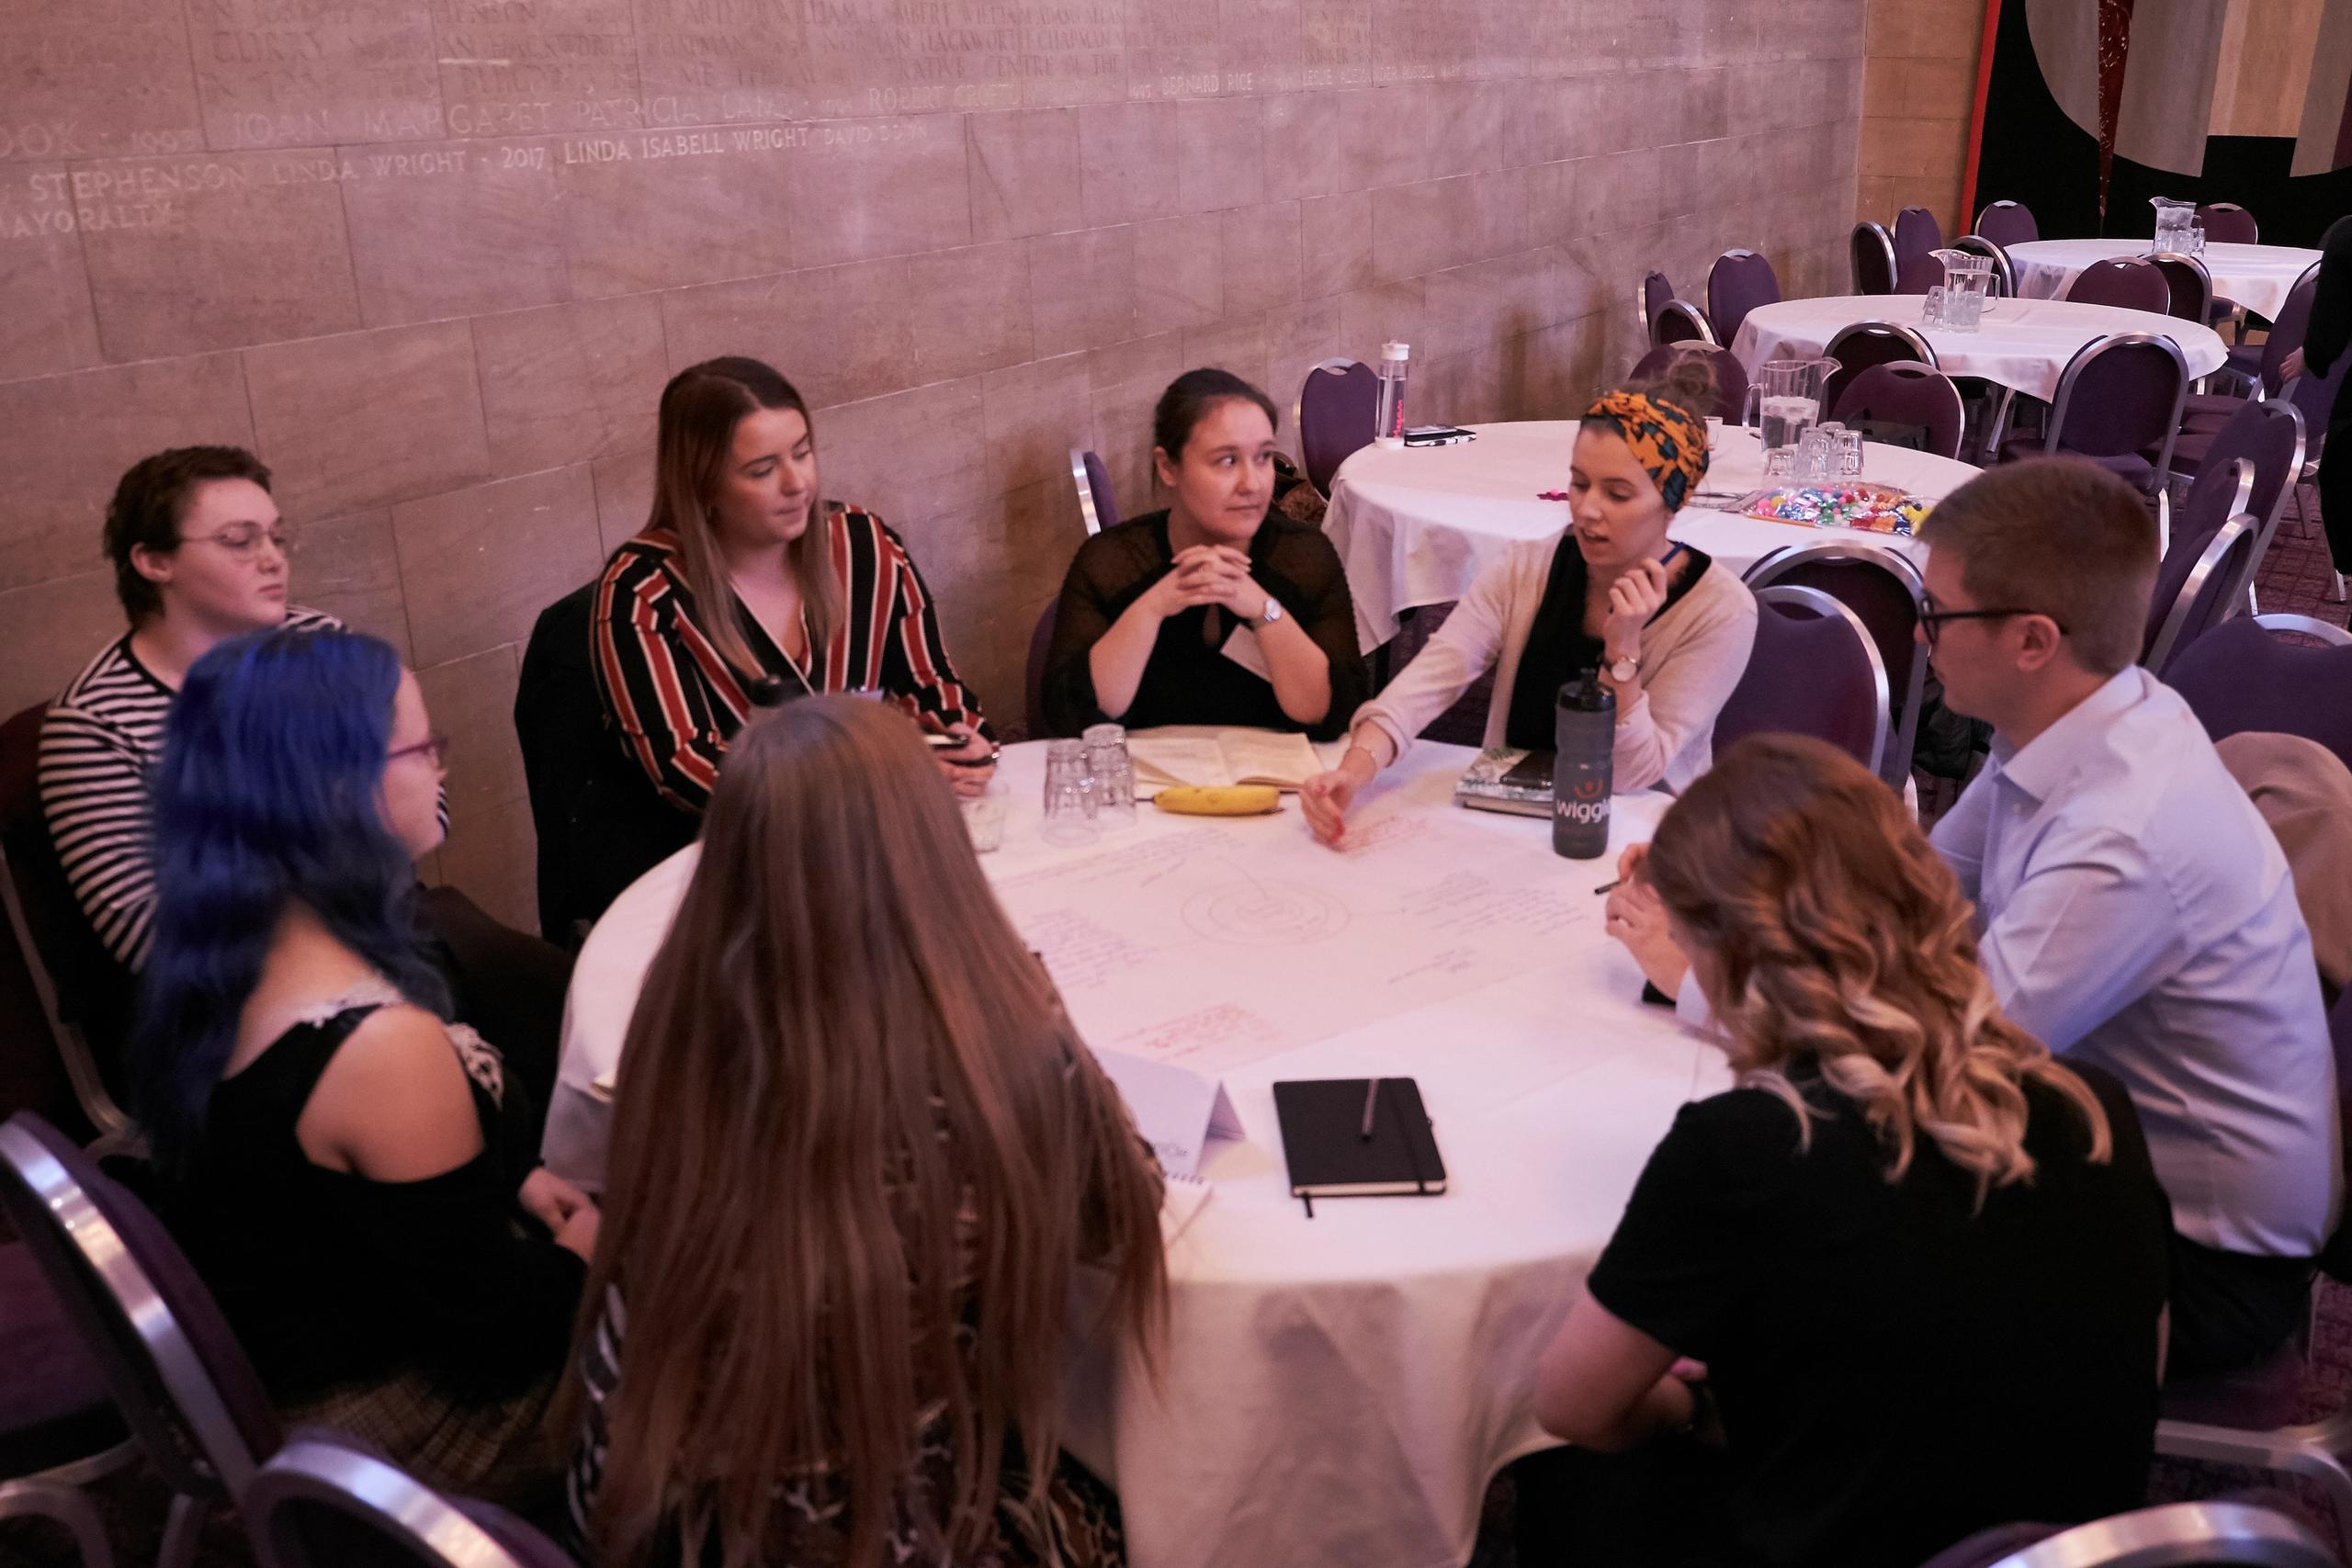 A group of young people in conversation around a table